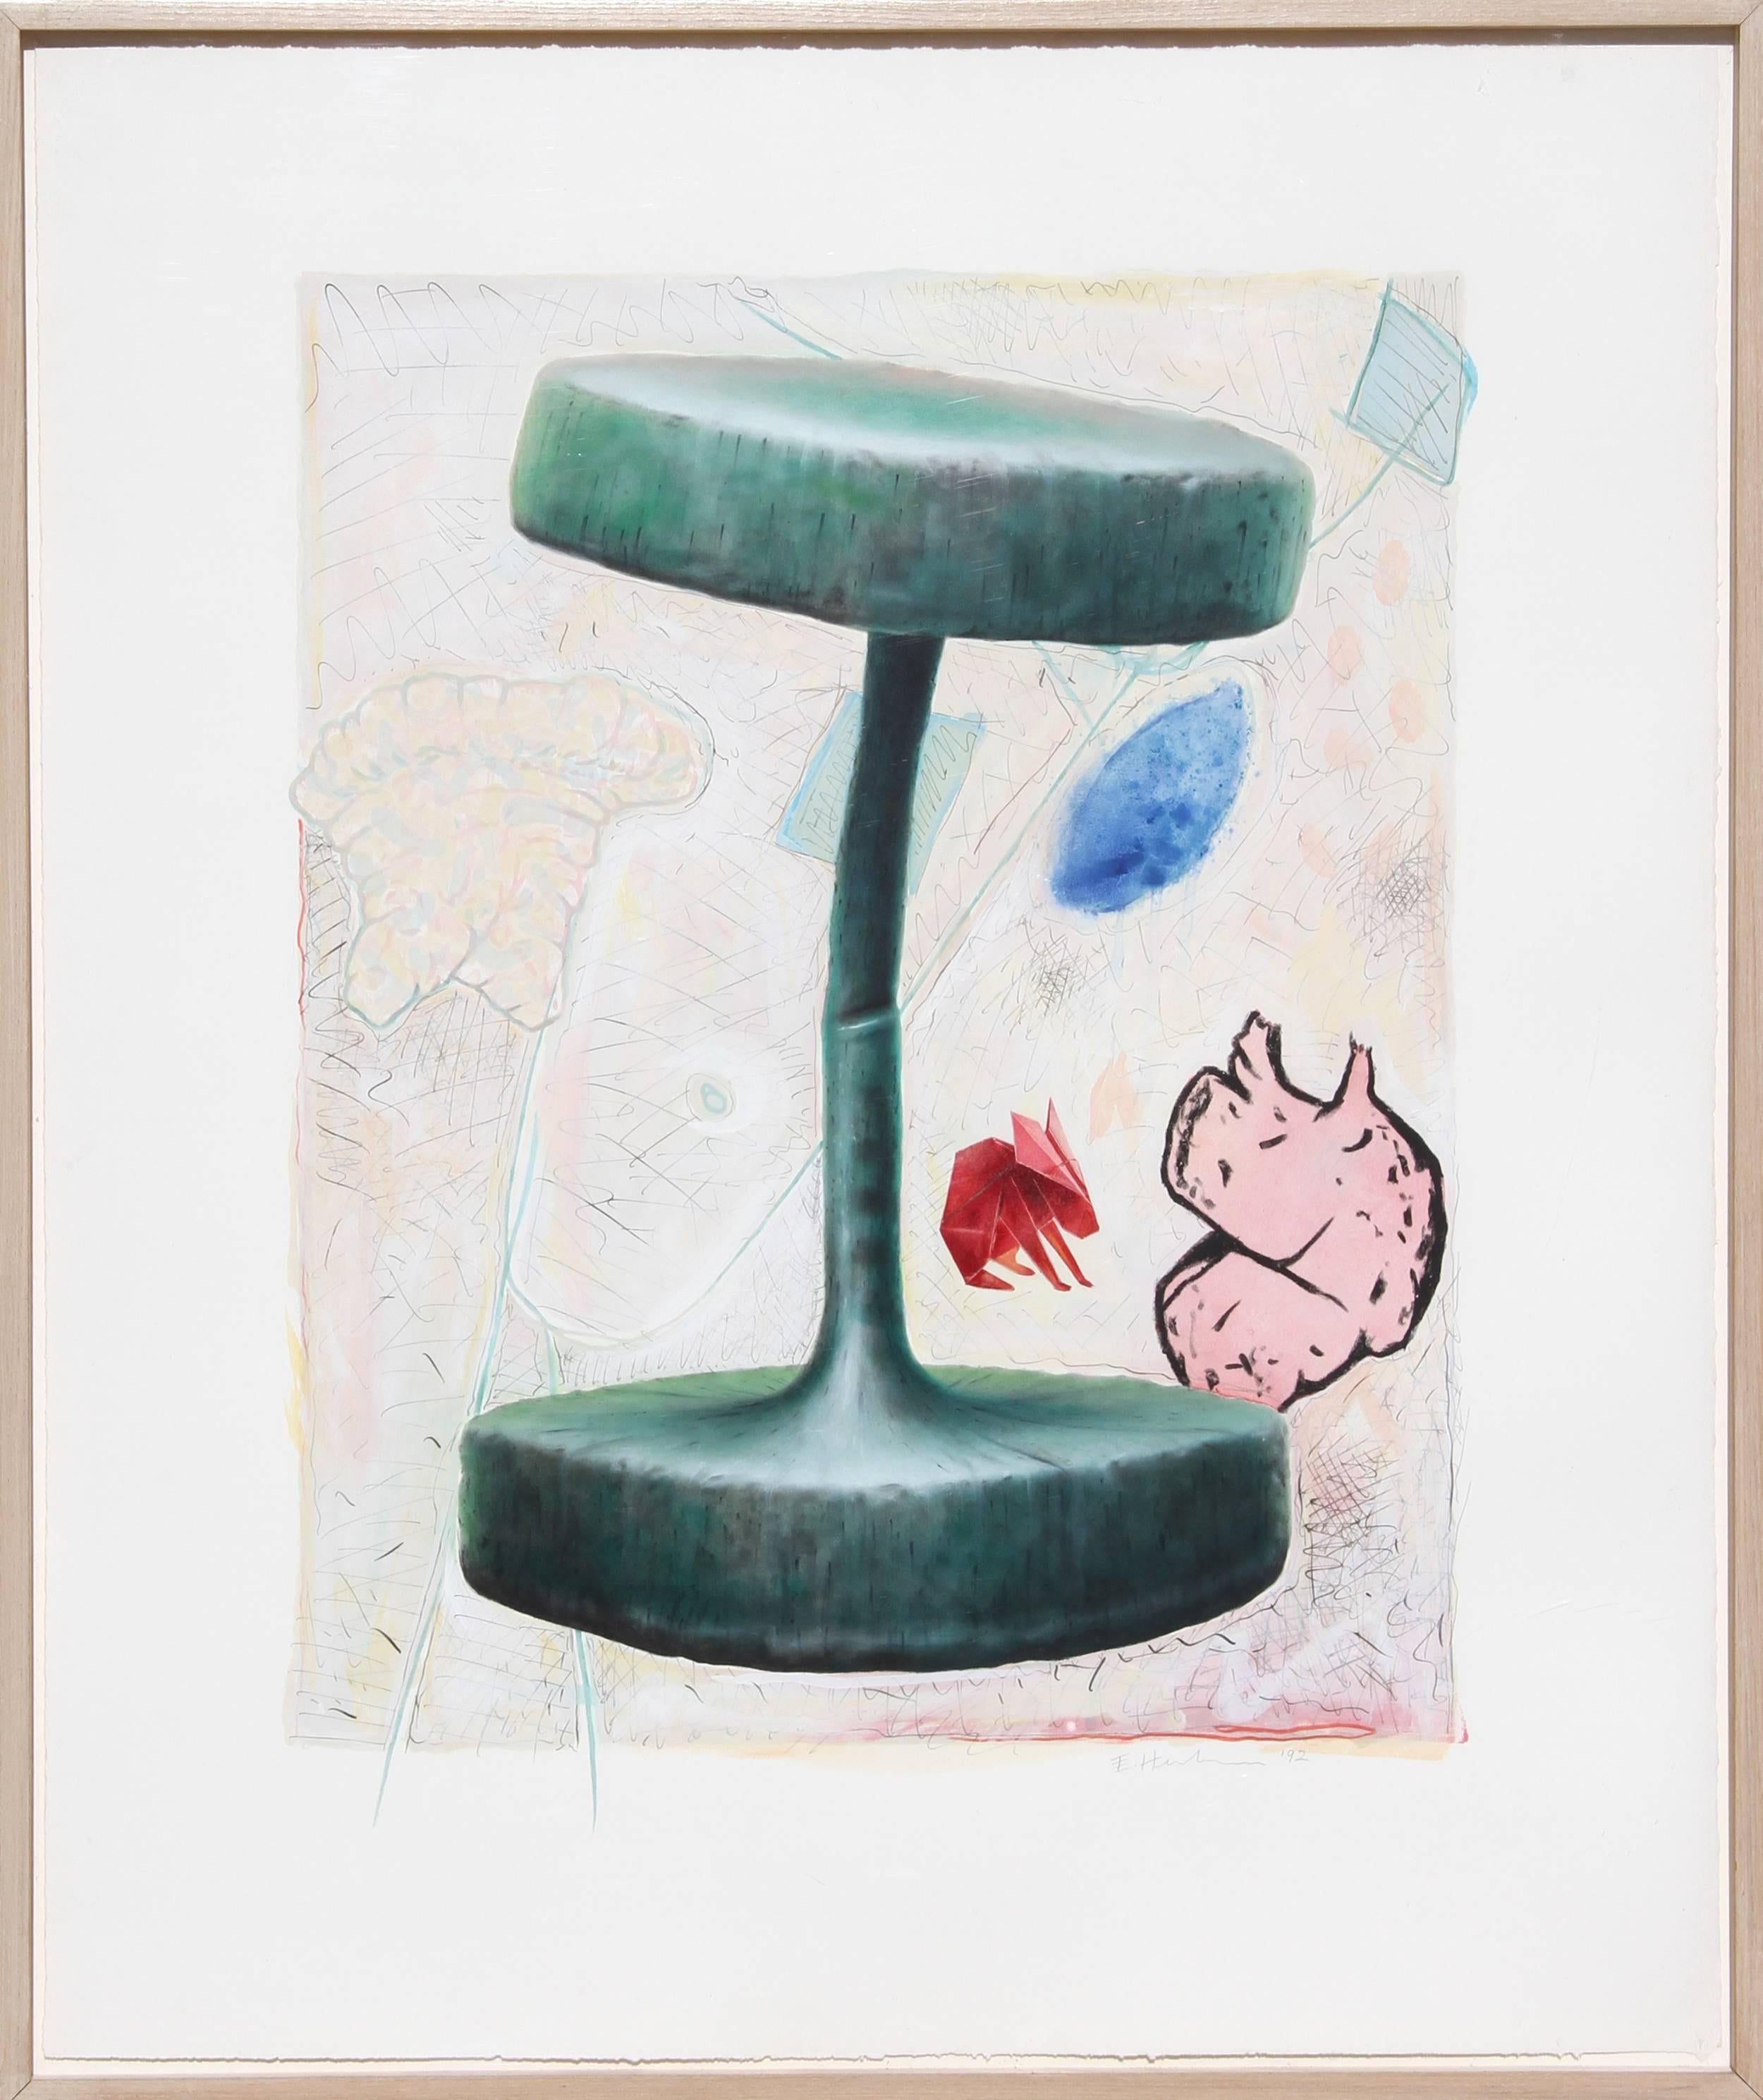 Edward Henderson, "Untitled 2", Mixed Media Painting on Paper, 1992